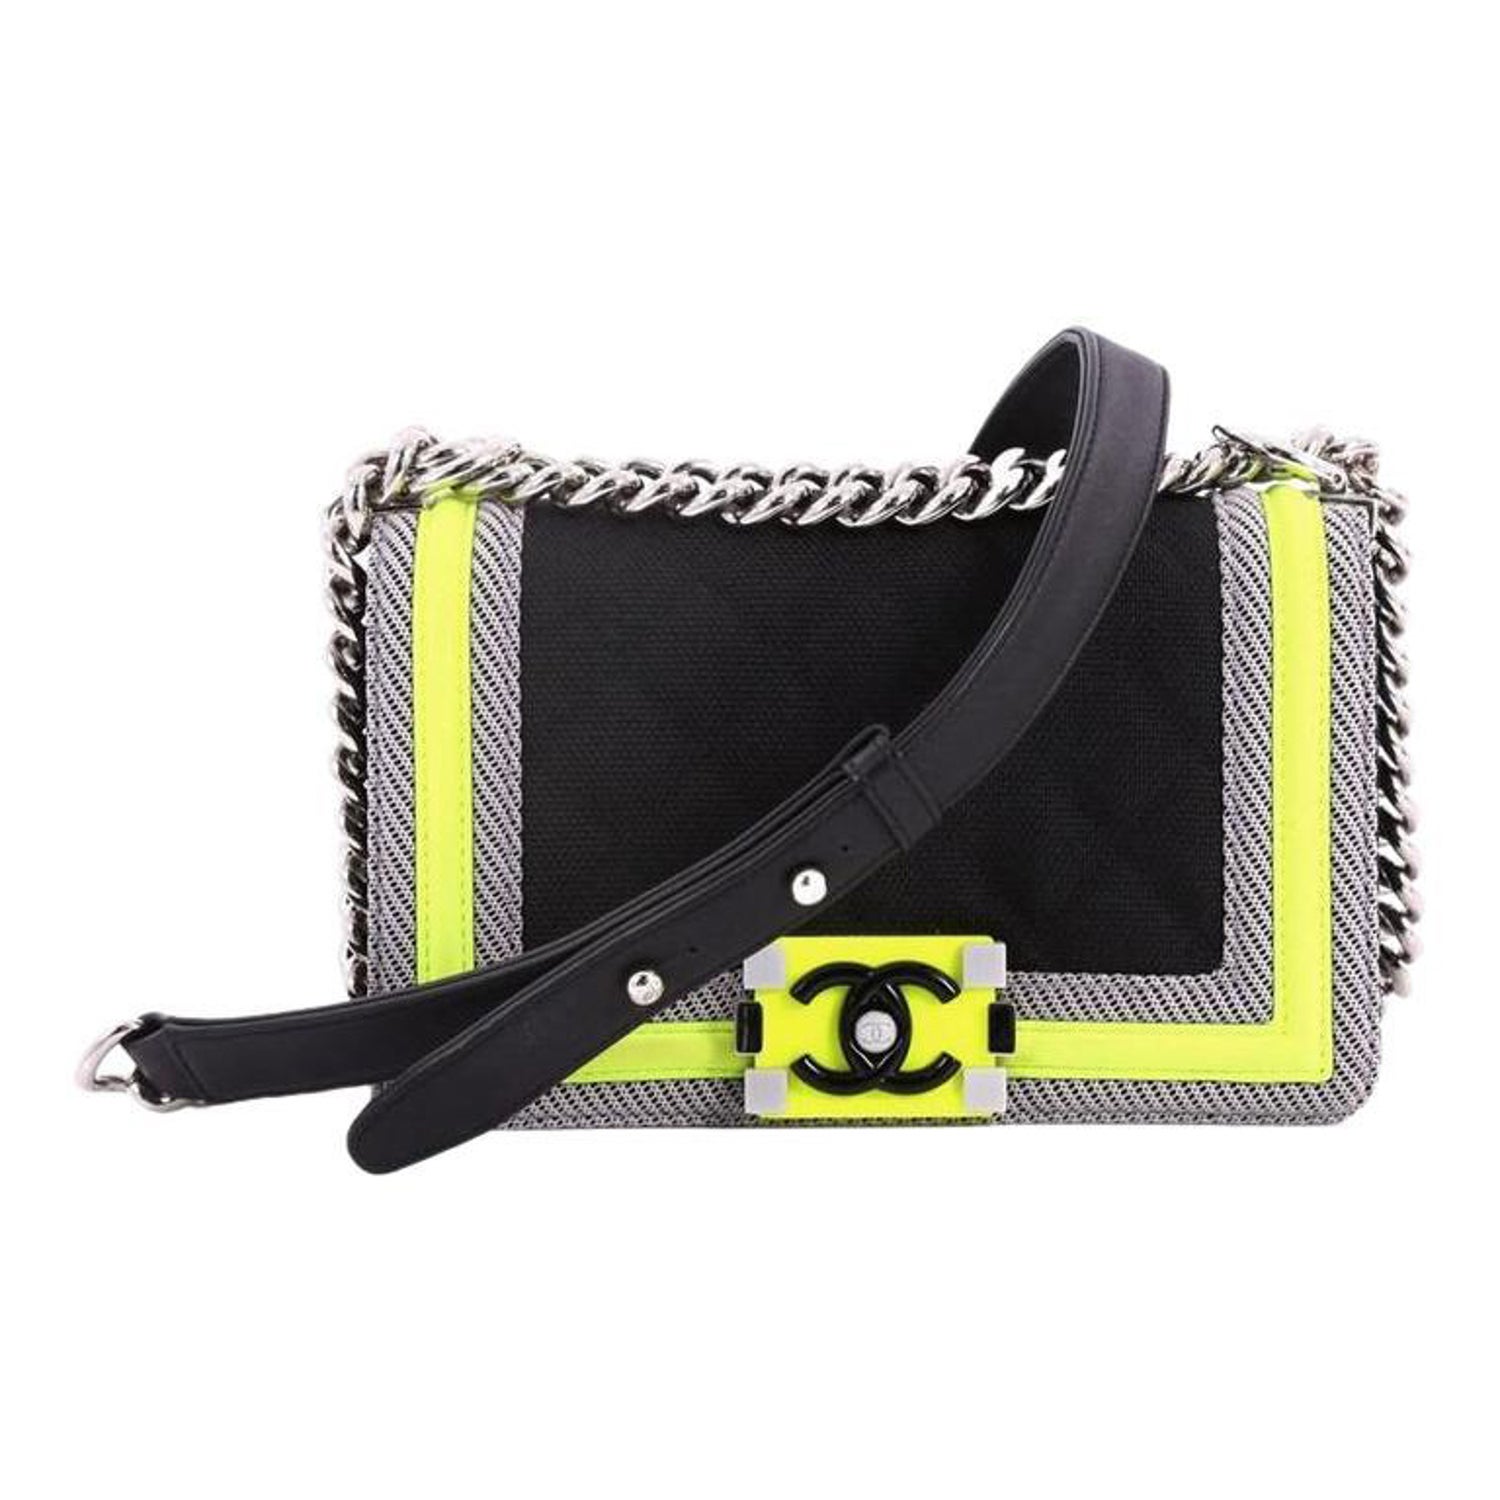 Chanel Classic Flap 2.55 Reissue Fall 2014 Yellow Tweed